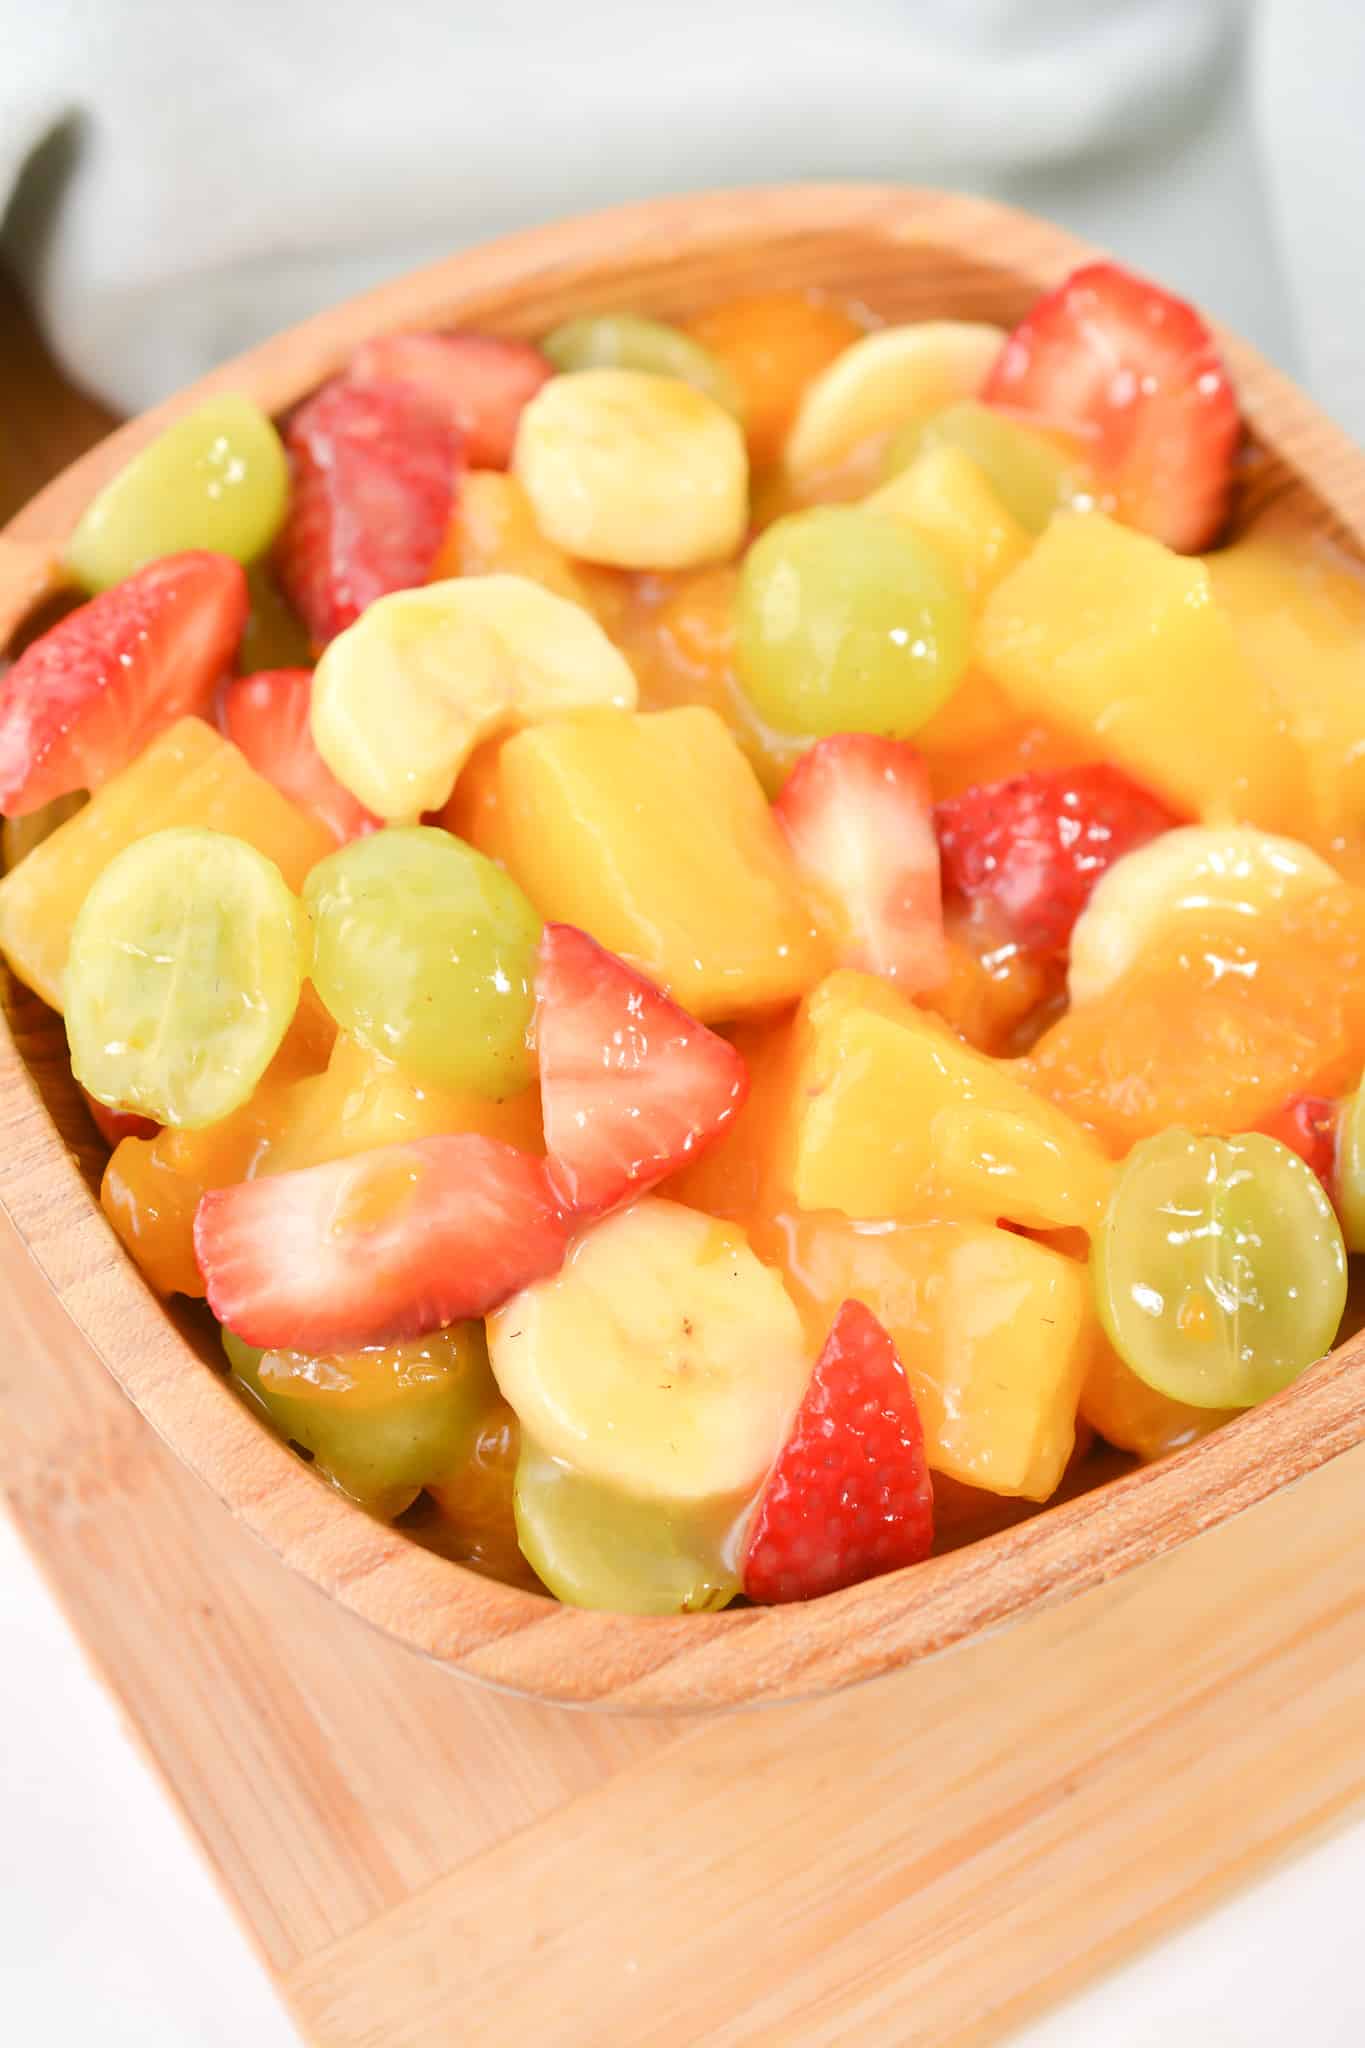 fruit salad with instant pudding